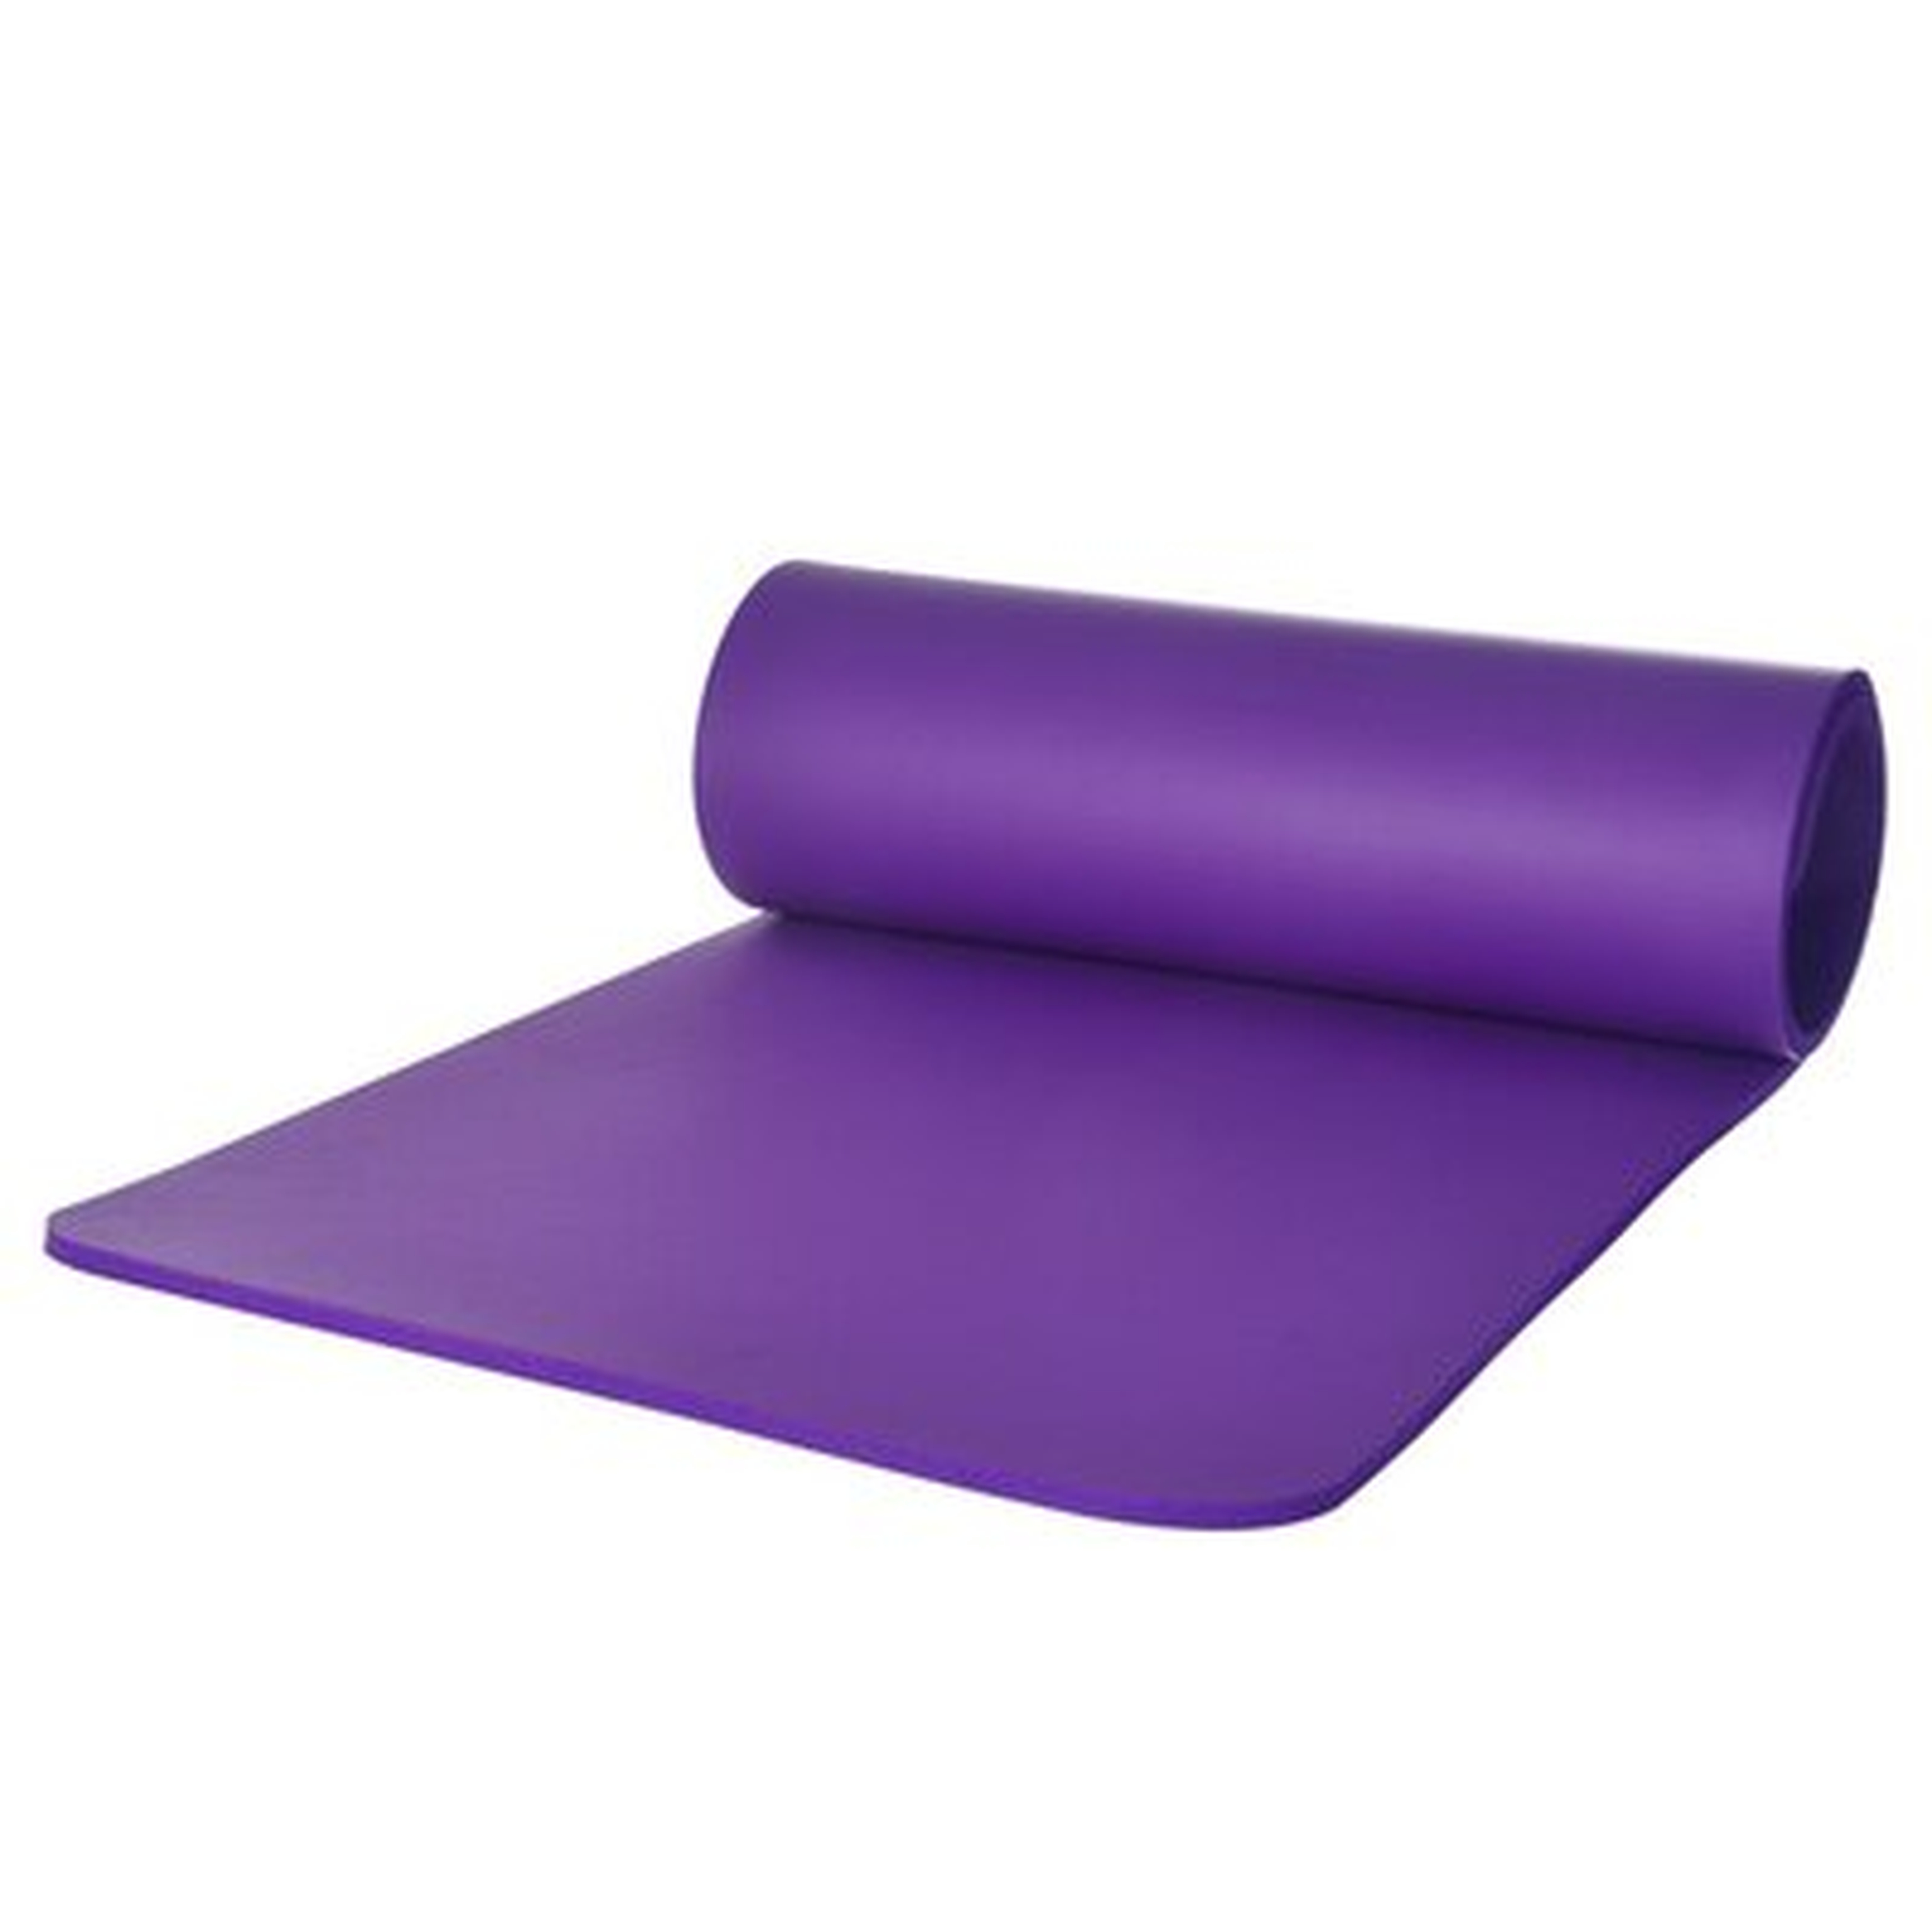 0.4 Inch Thick Yoga Mat Extra Thick Non Slip Exercise Mat For Indoor Outdoor Use - Wayfair